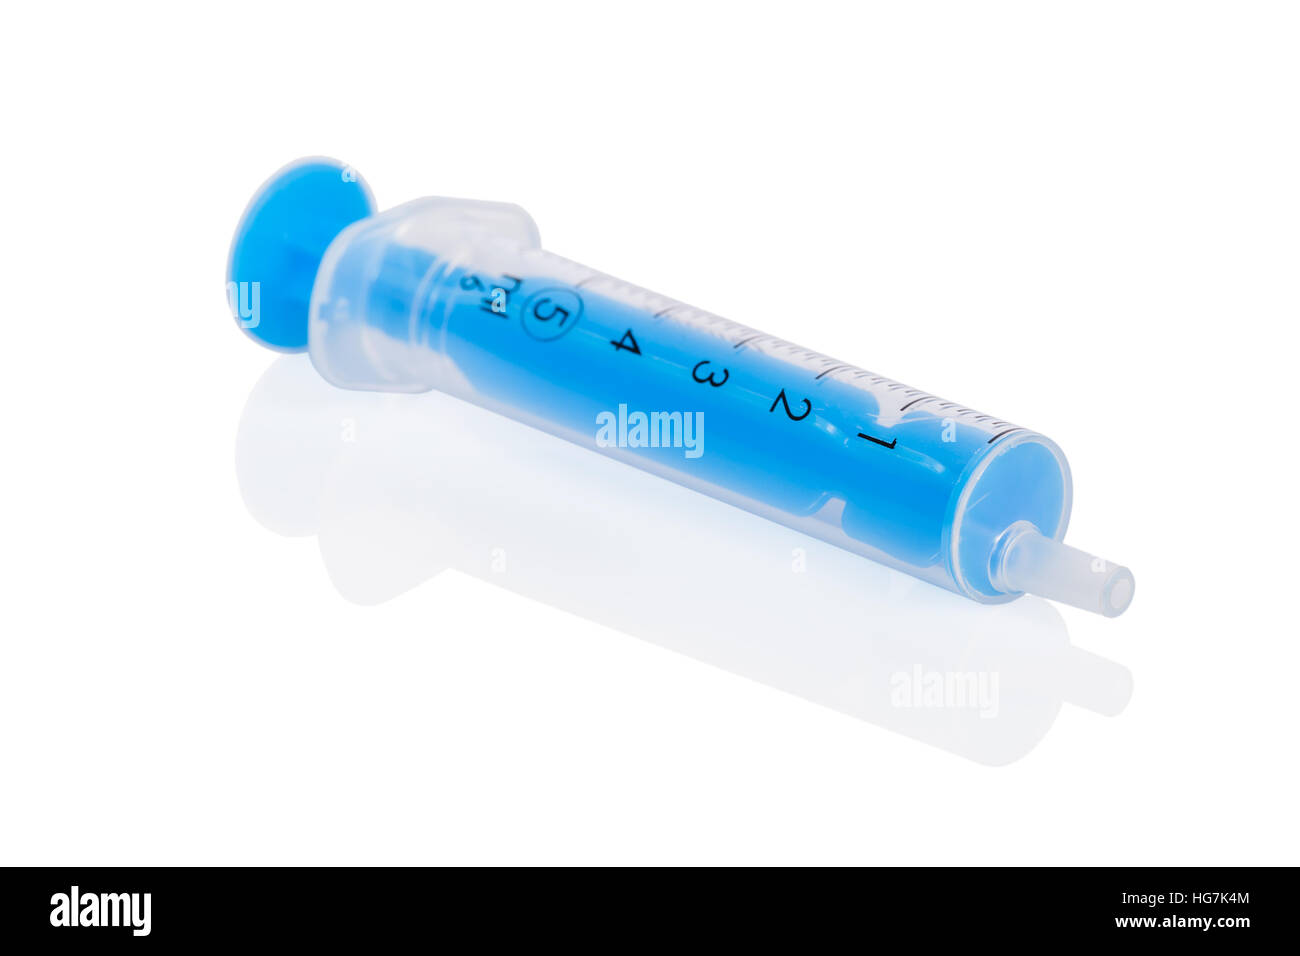 Small disposable syringe made of plastic, with an empty barrel and plunger on the bottom of the scale, isolated on white Stock Photo